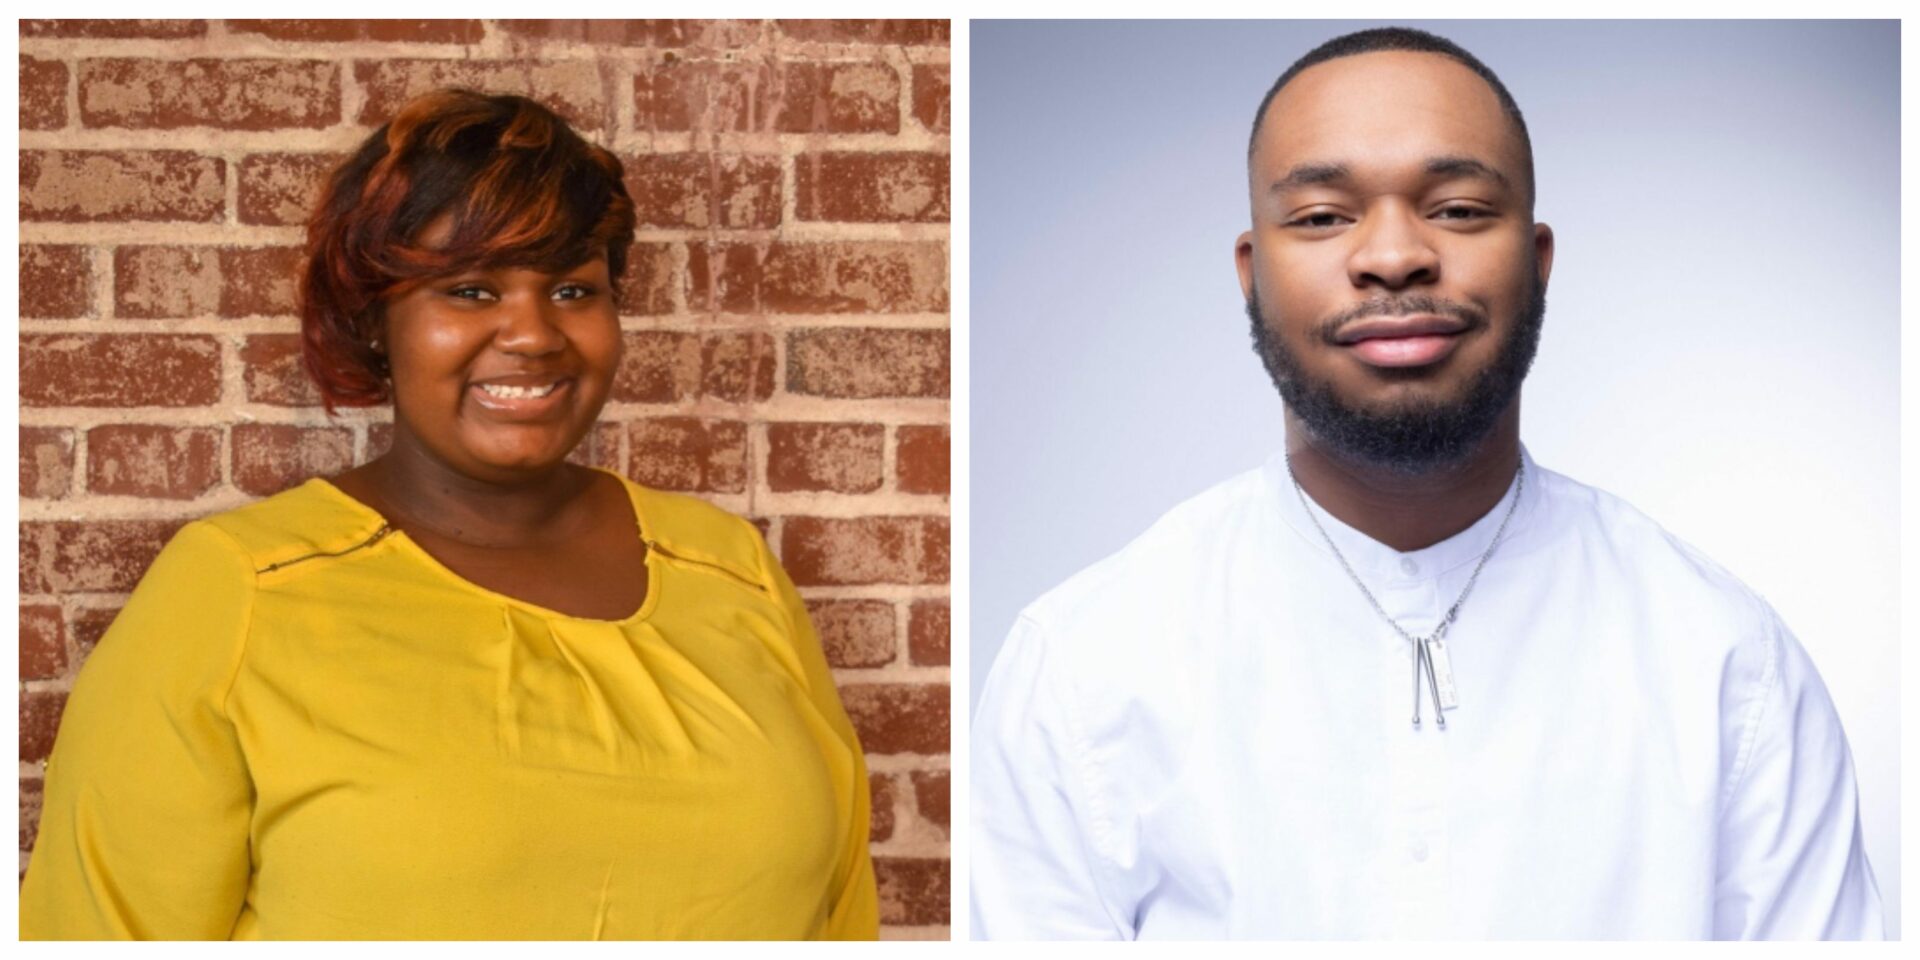 WHERE ARE THEY NOW? WORKING FOR SOULSVILLE. Soulsville Foundation committed to hiring Stax Music Academy and Soulsville Charter School graduates BeFunkyCATSAM